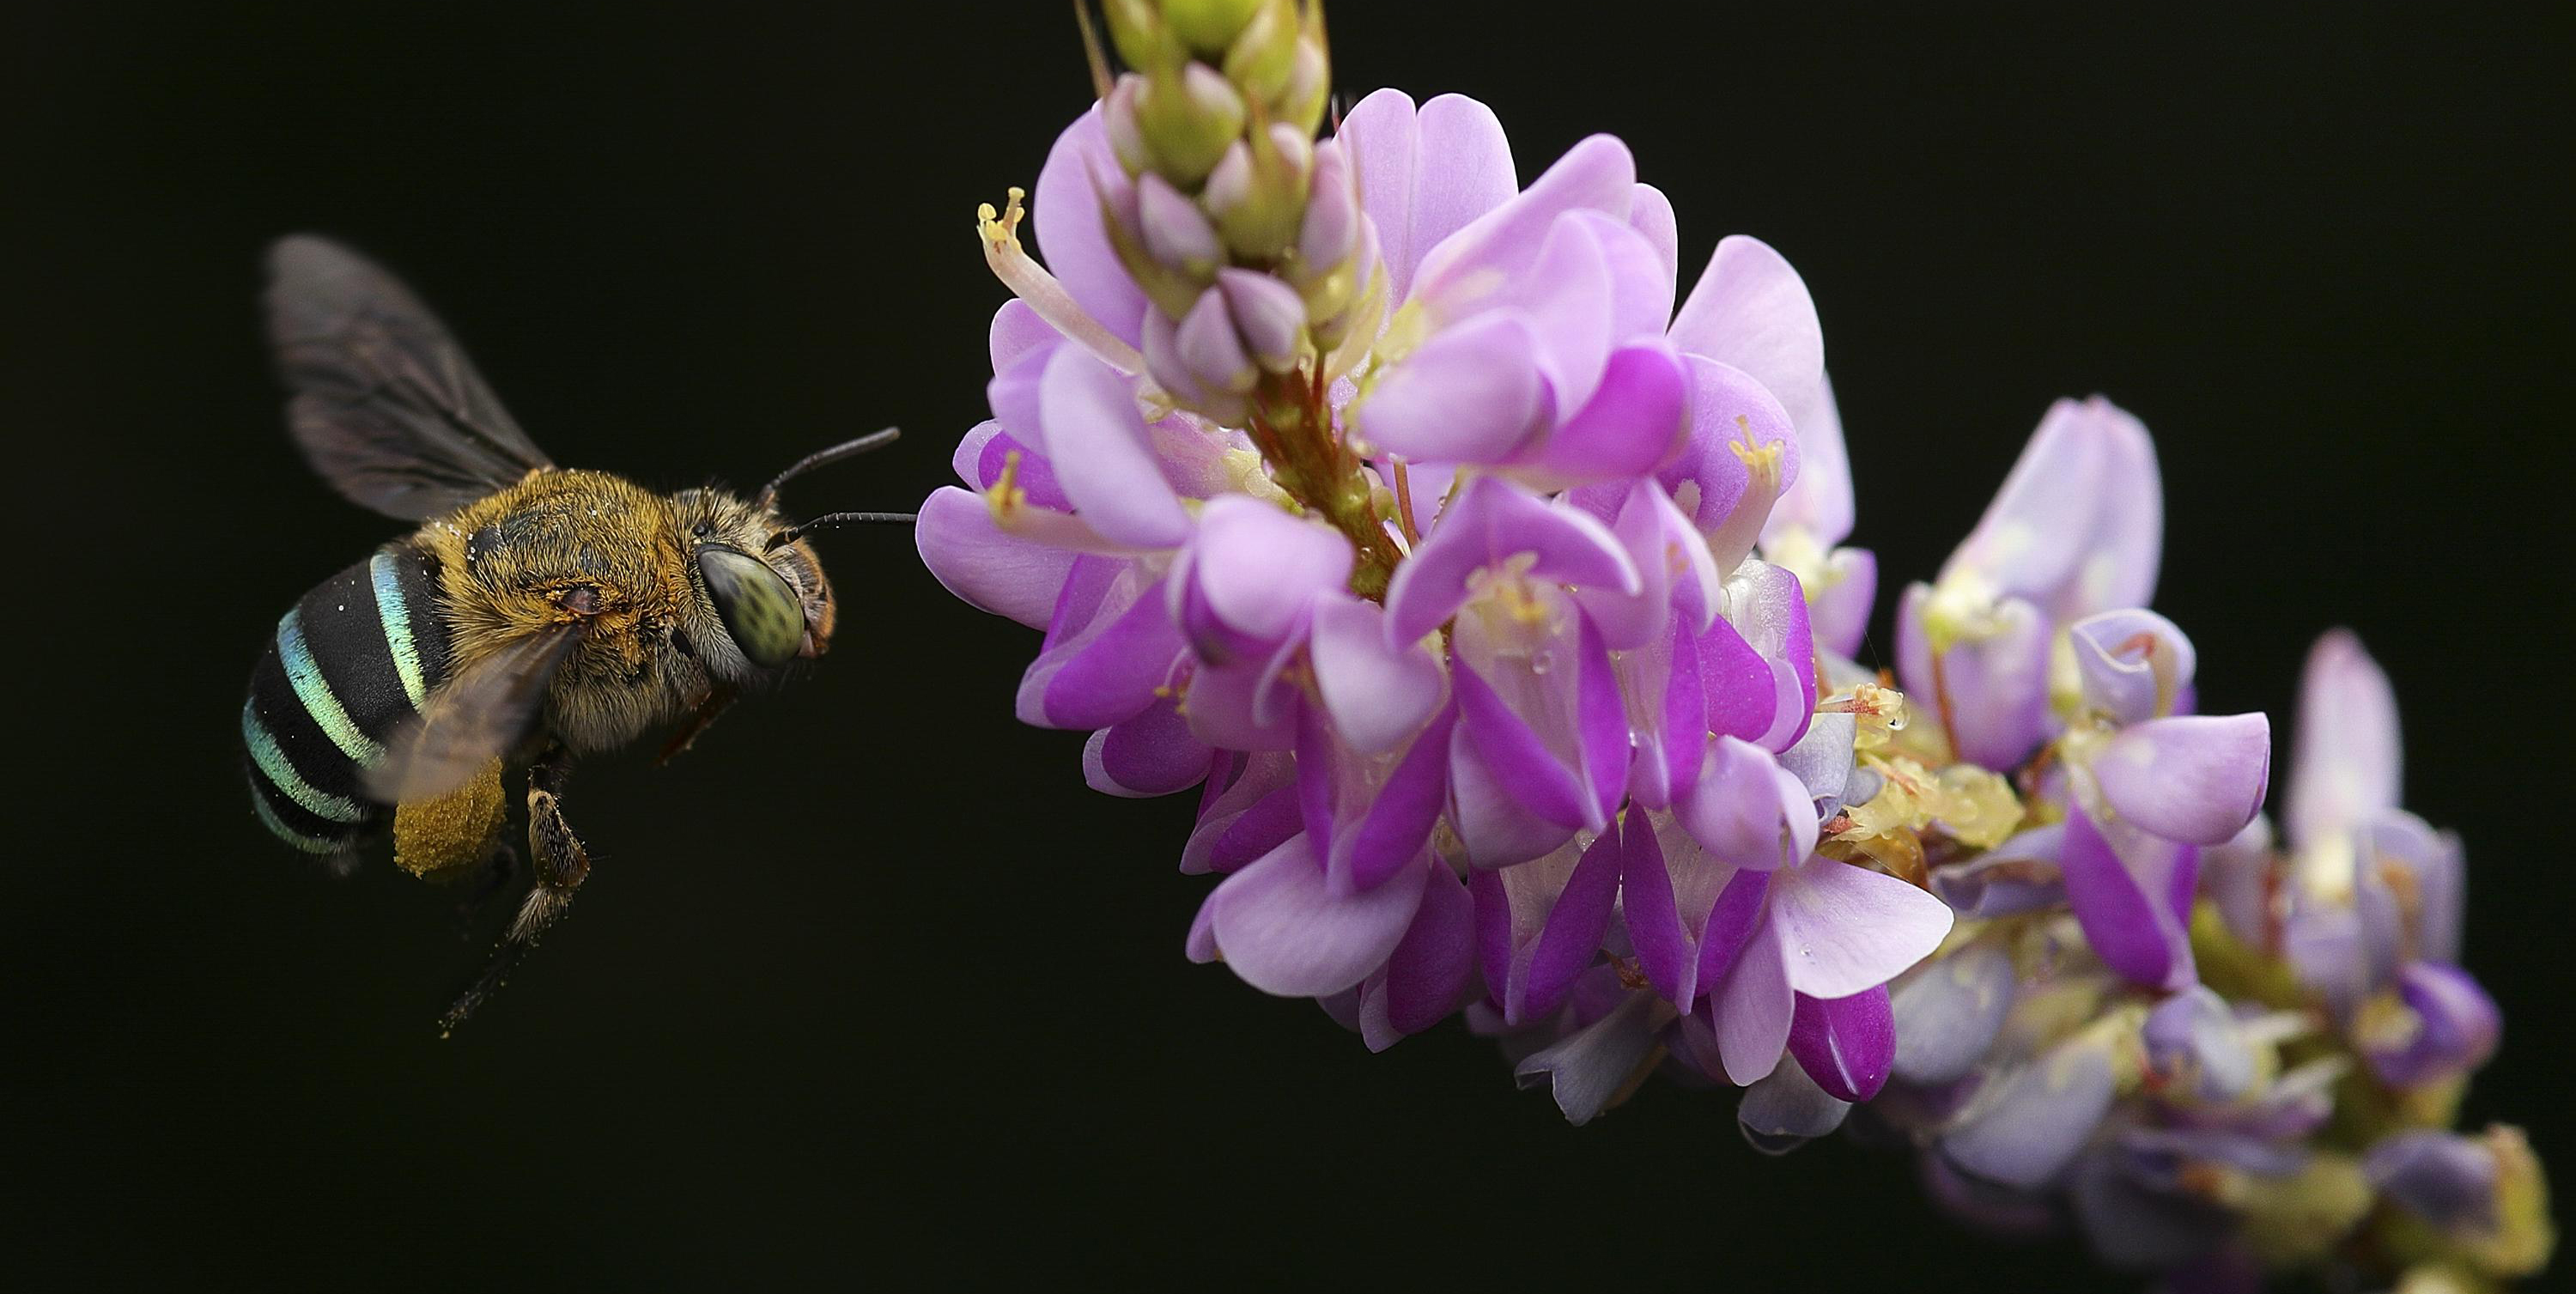 Photo of a bee pollinating a flower.